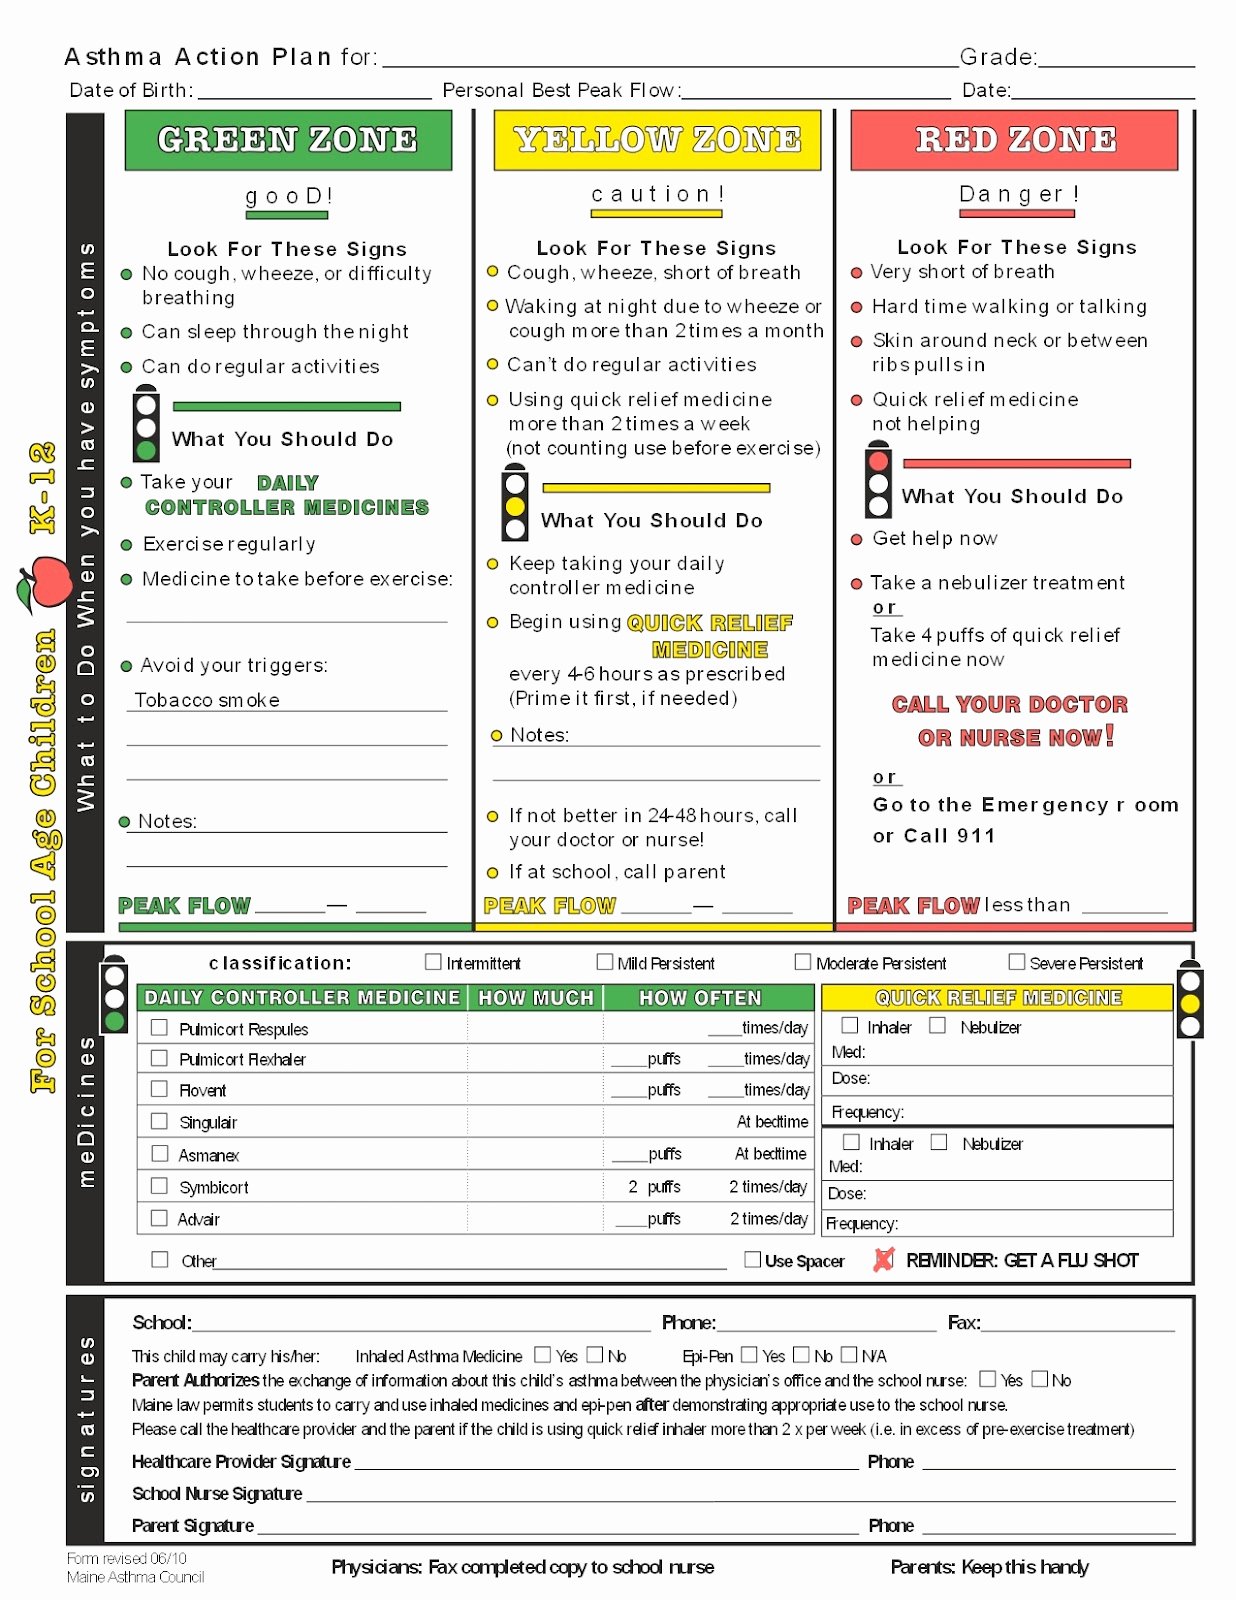 Diabetes Management Plan Template Awesome asthma Action Plan Template